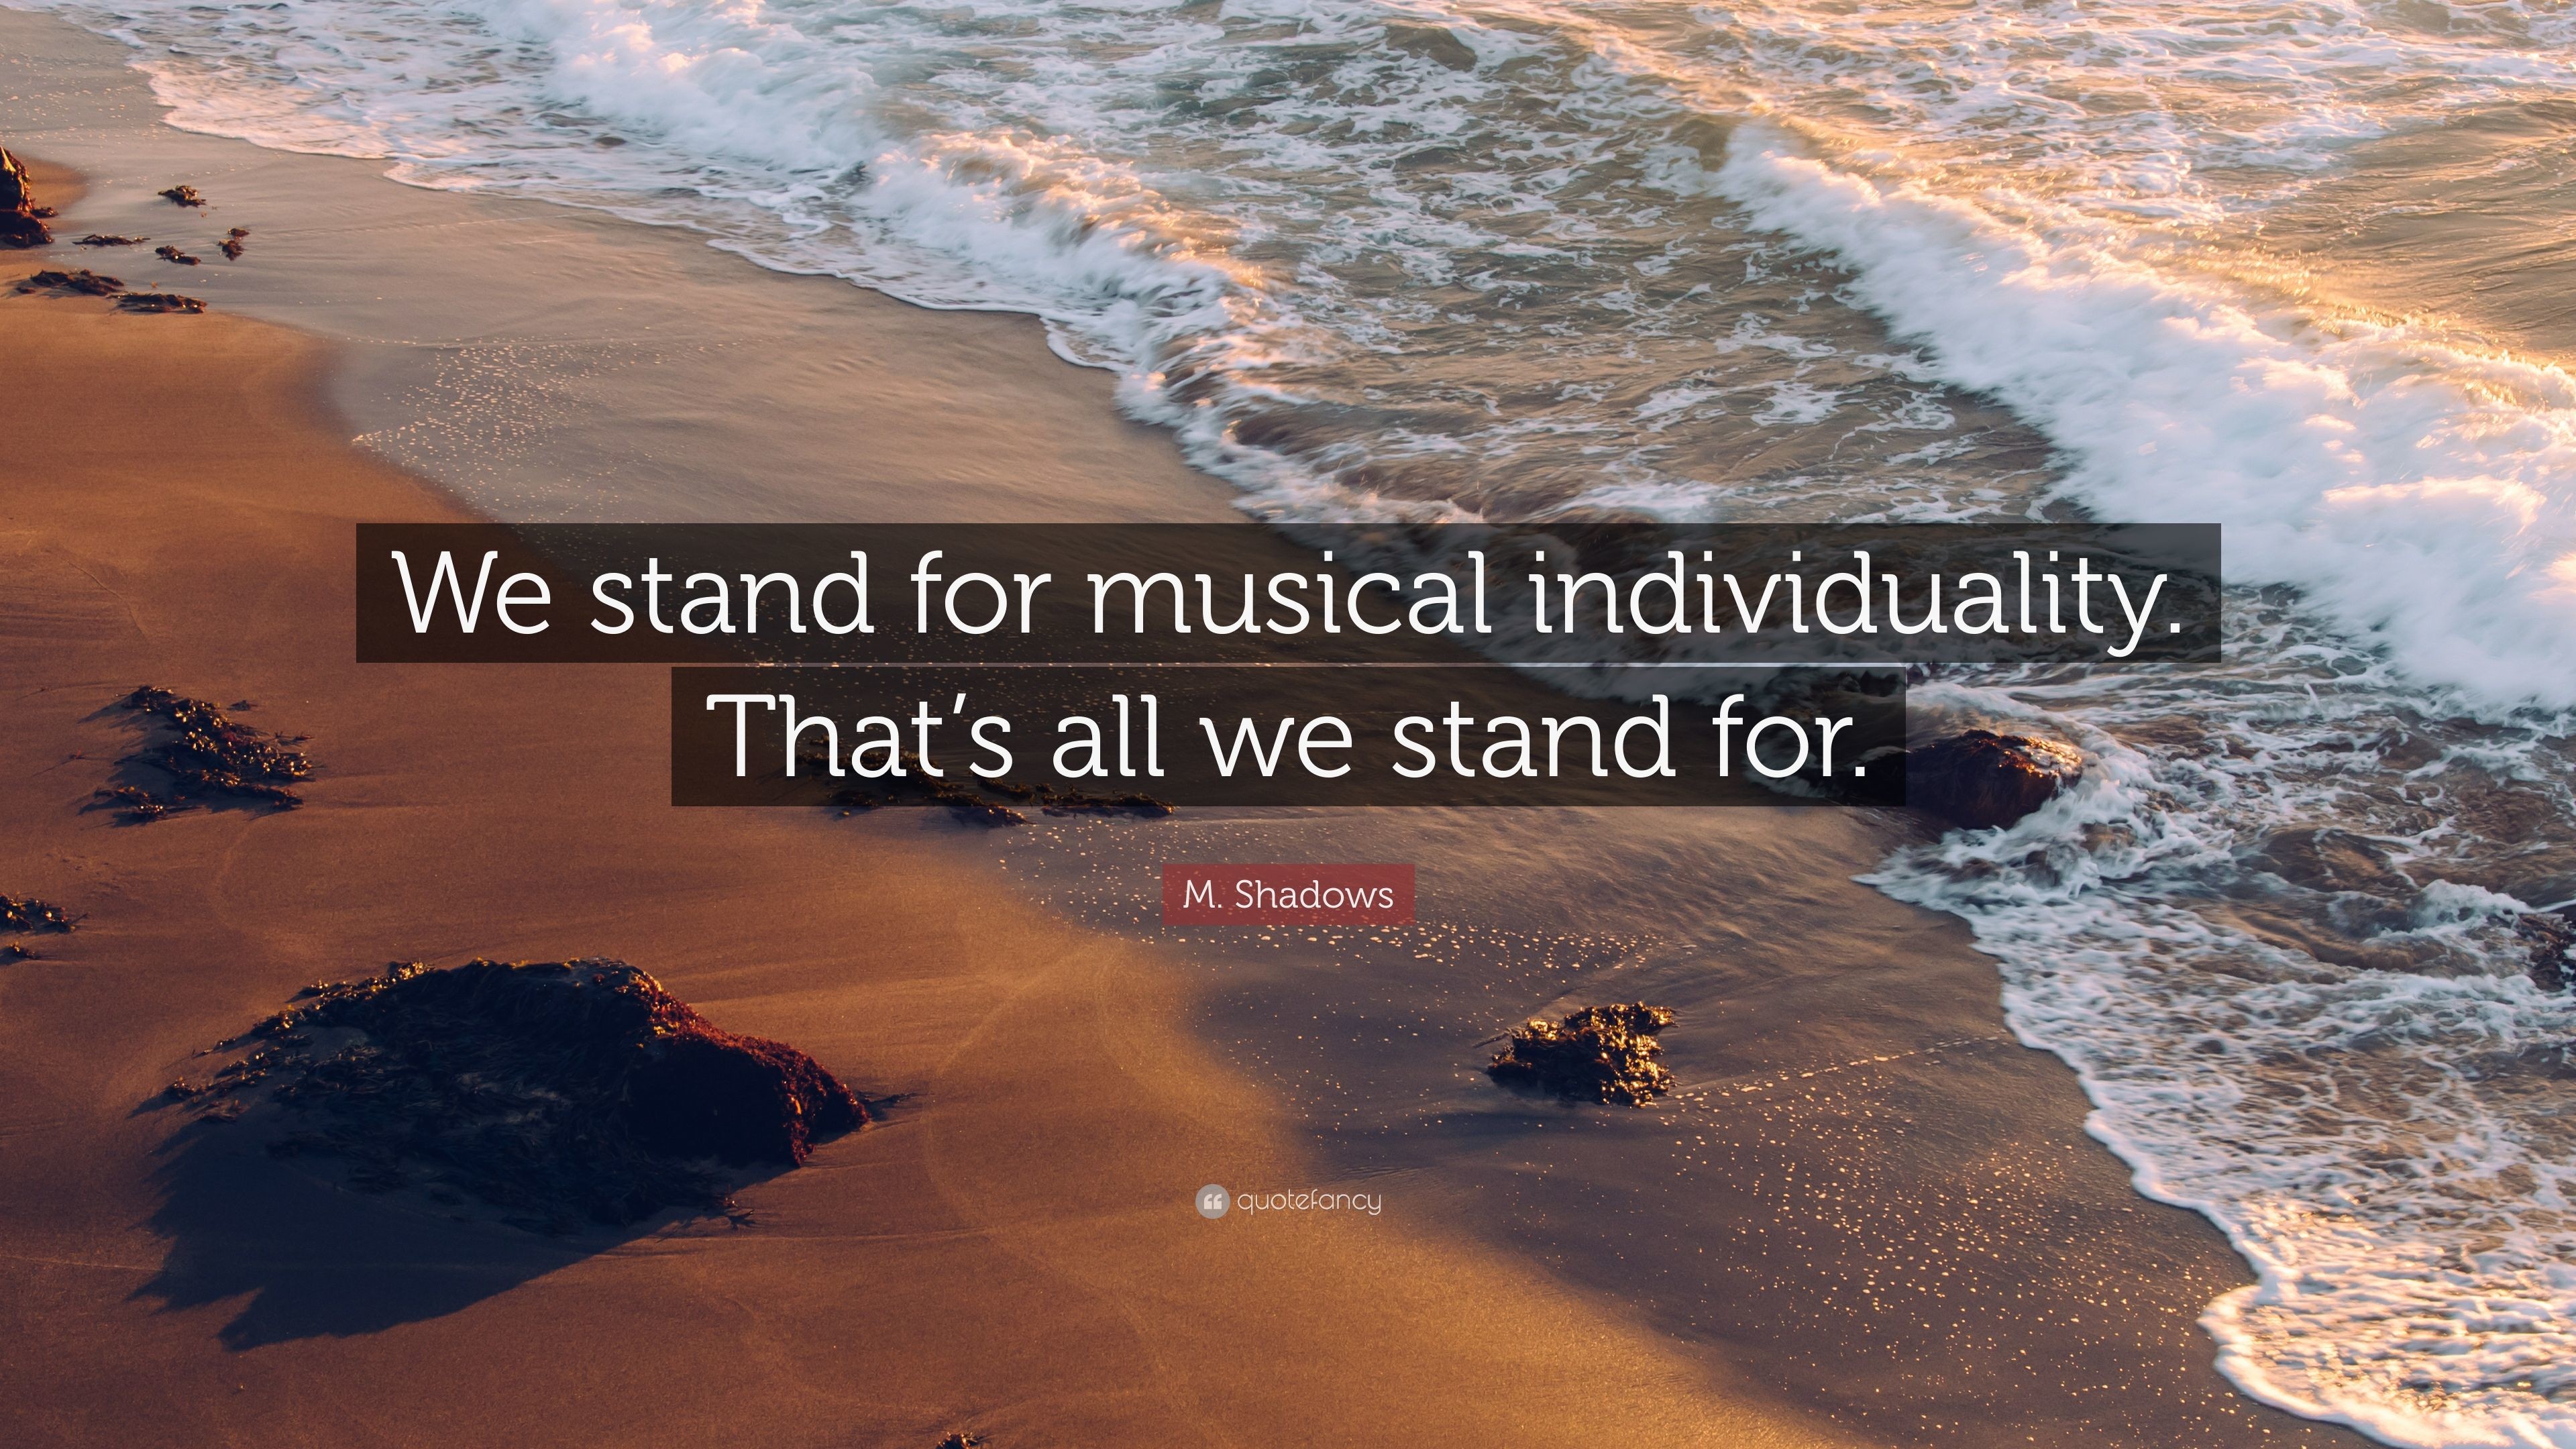 3840x2160 M. Shadows Quote: “We stand for musical individuality. That's all we stand